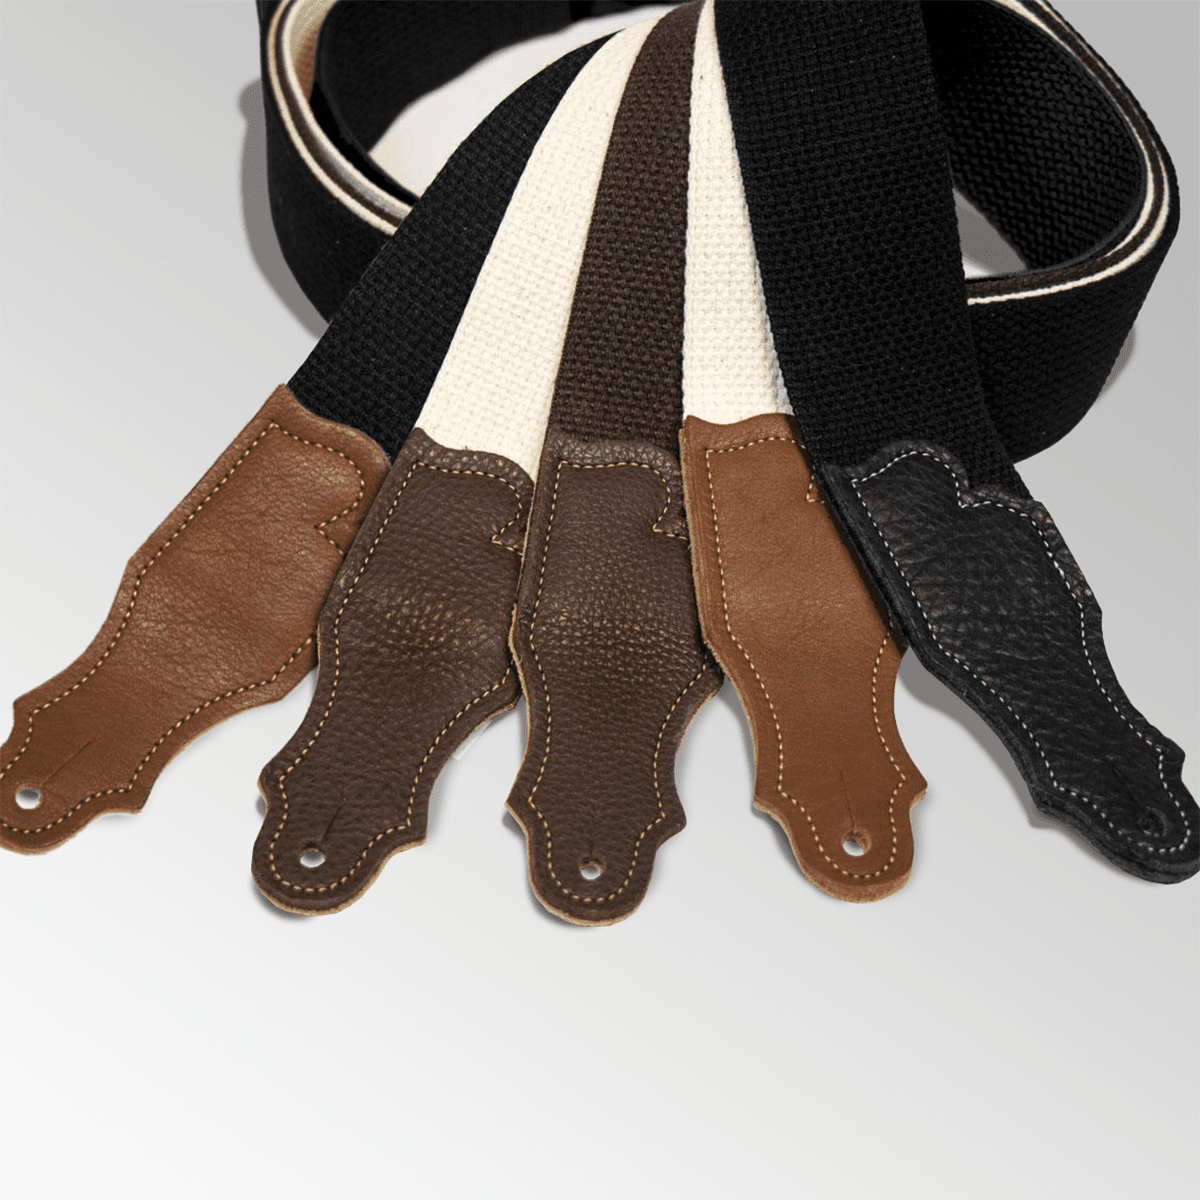 Franklin 2" Natural Cotton Strap with Pebbled Caramel Glove Leather End Tab